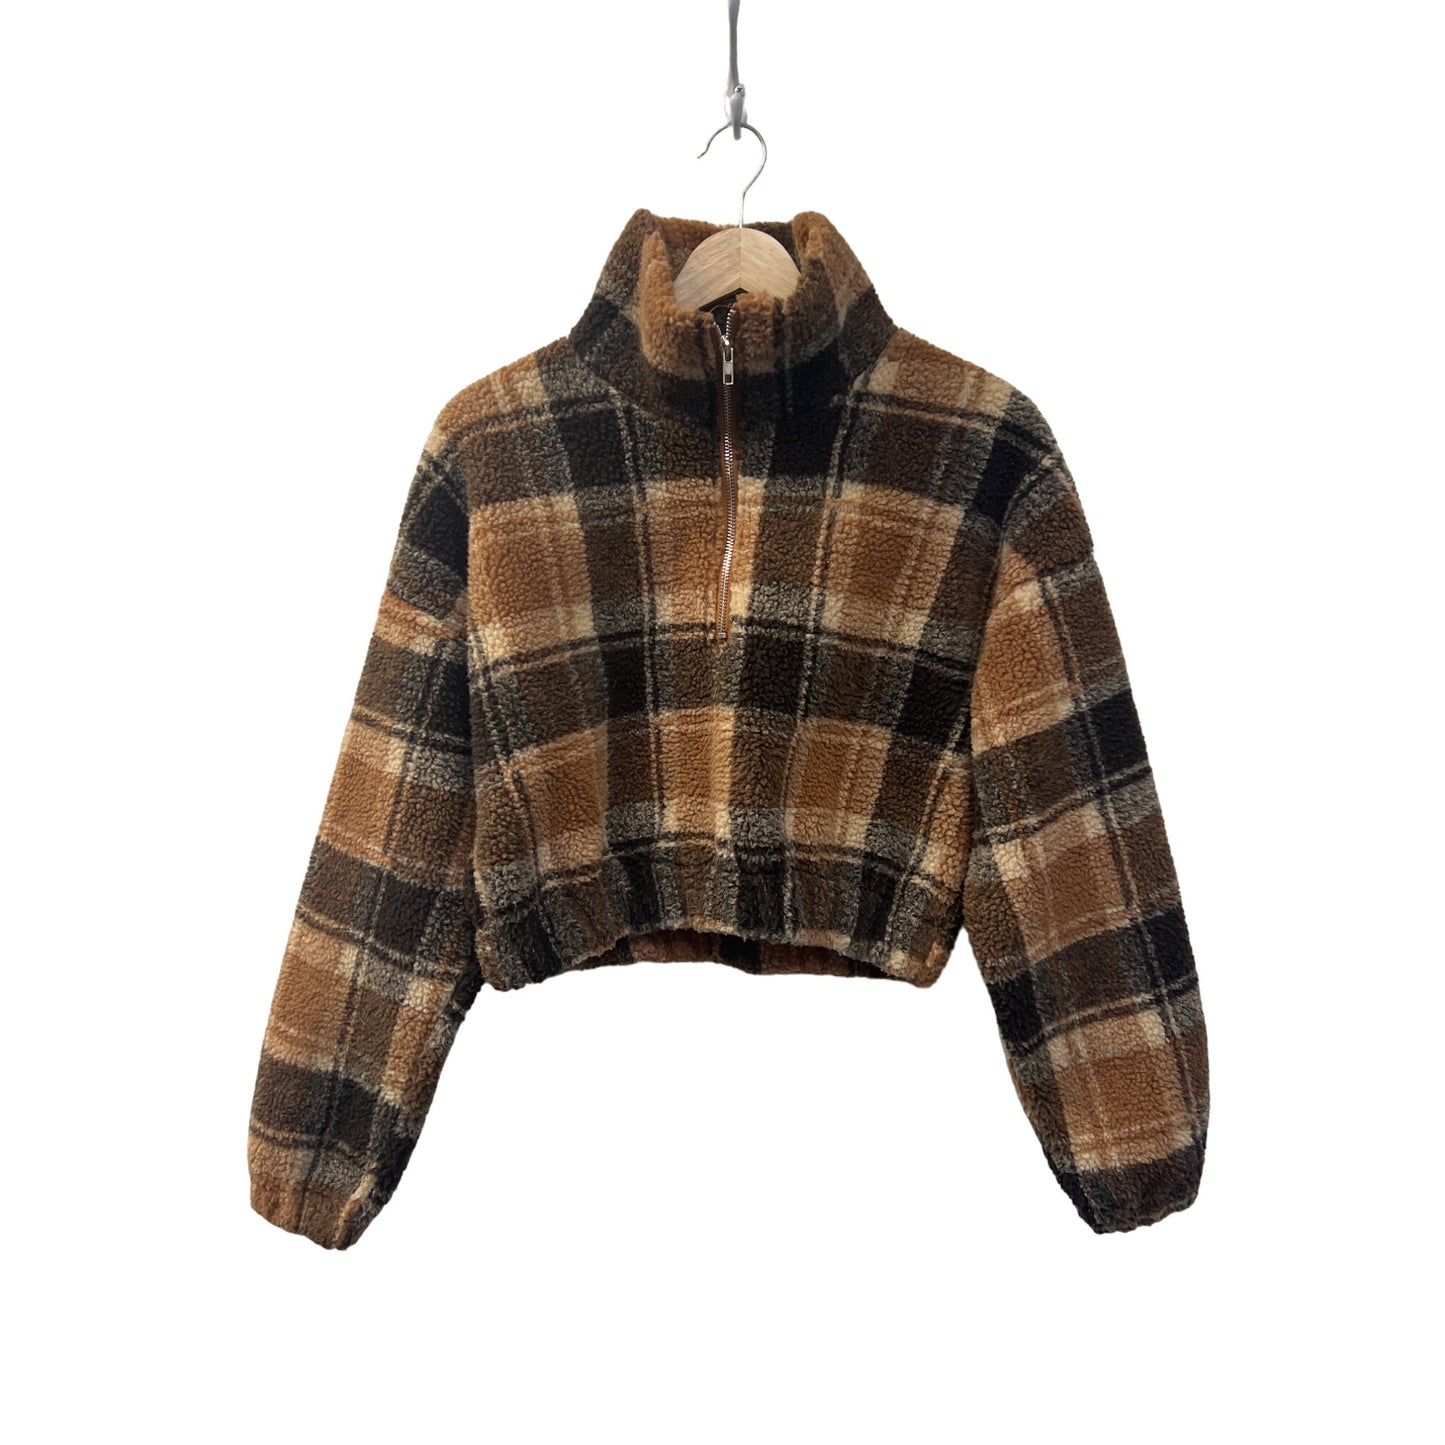 Zaful Cropped Brown Plaid Teddy Bear Quarter Zip Pullover Sweater